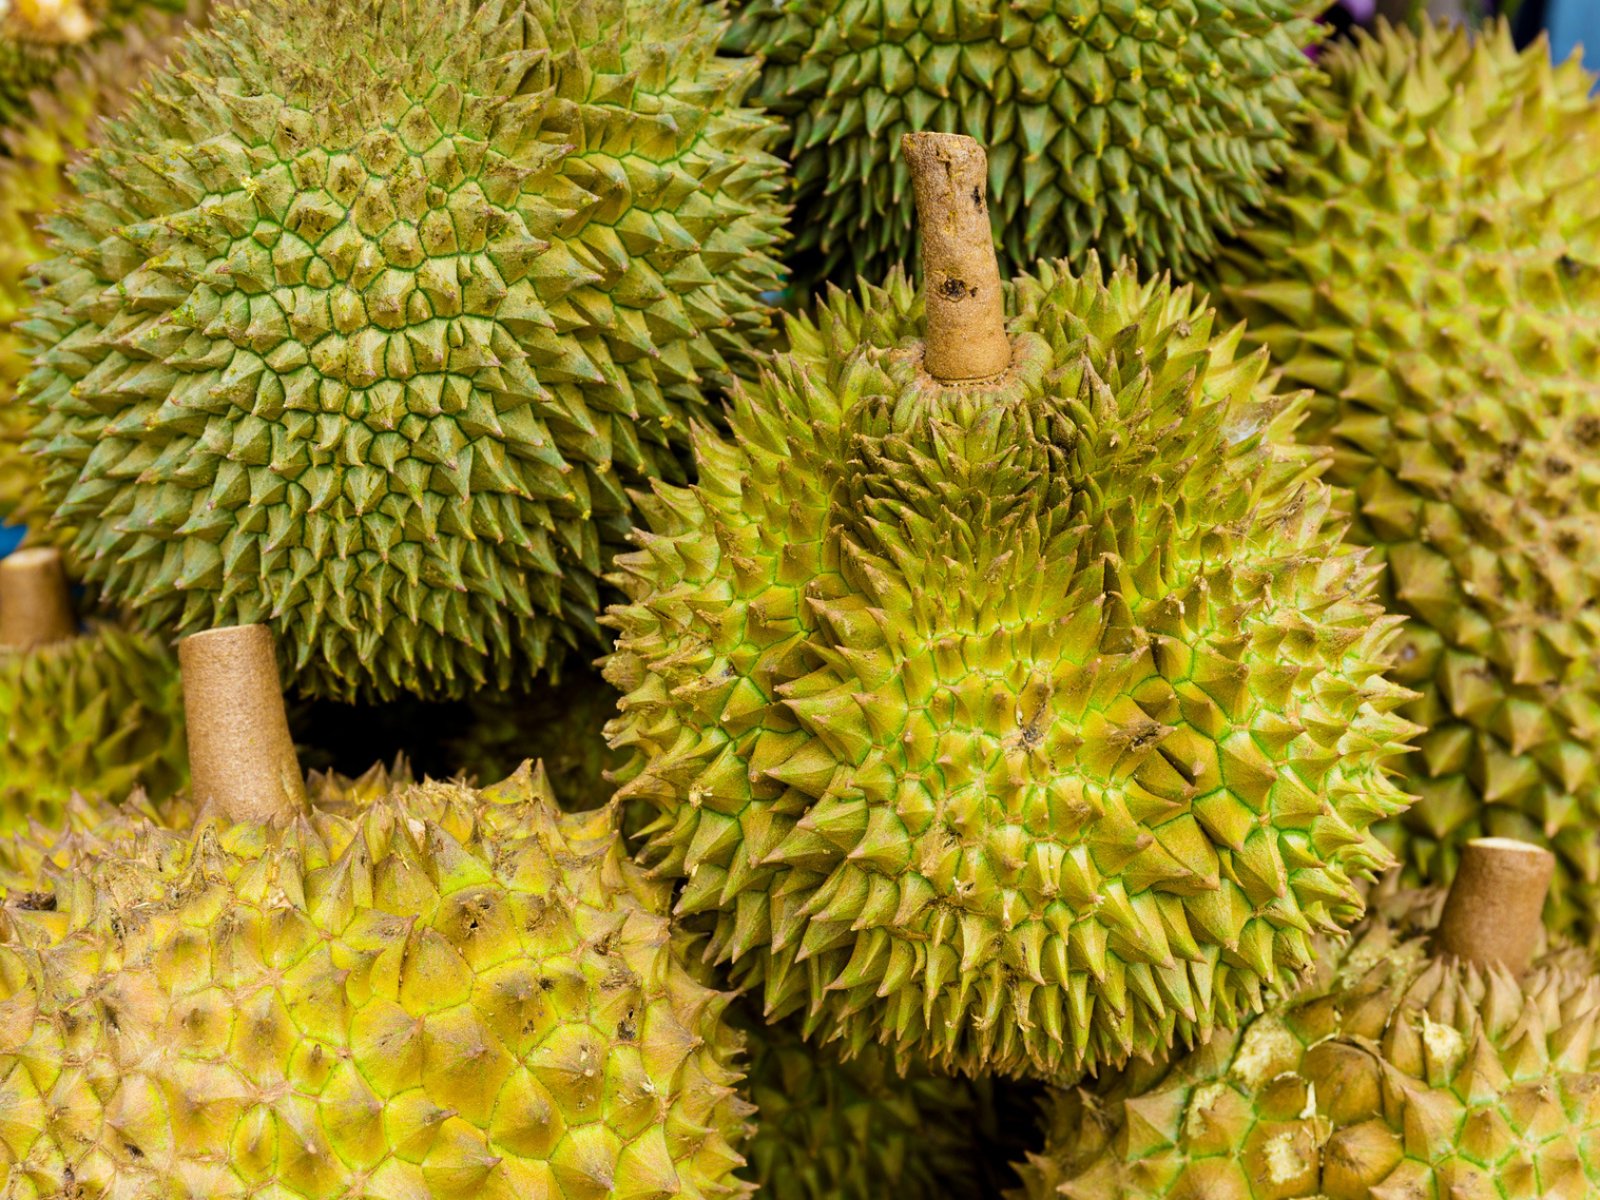 How to try durian in Phuket